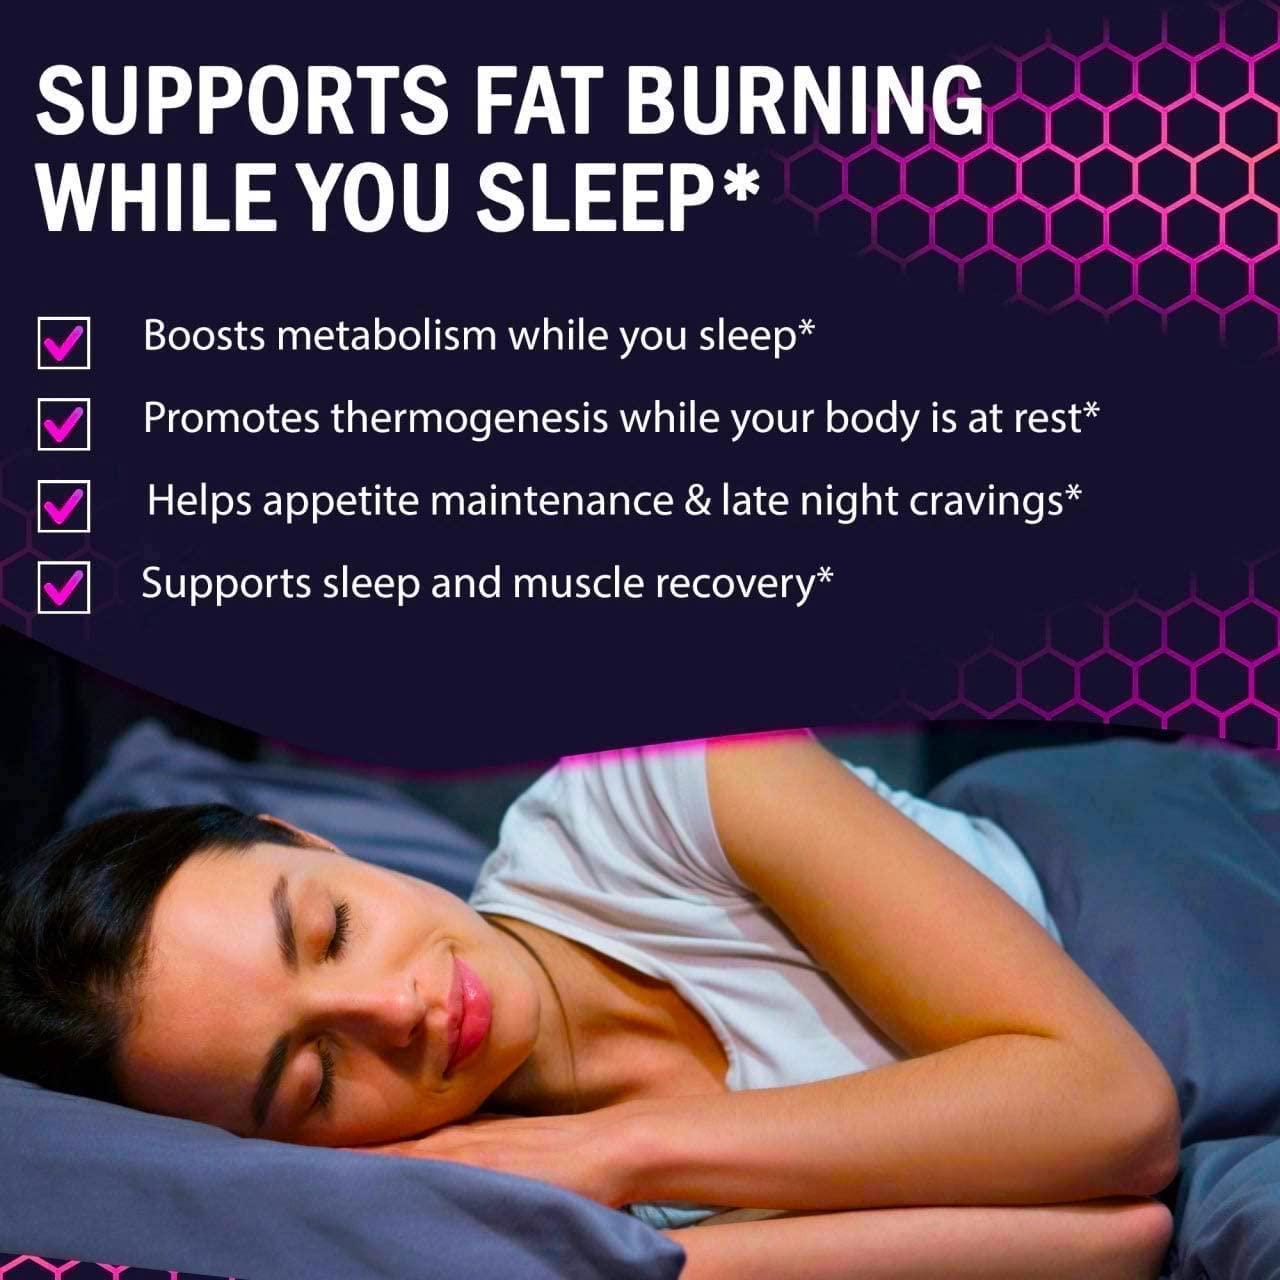 Night Time Fat Burner, Shred Fat While You Sleep